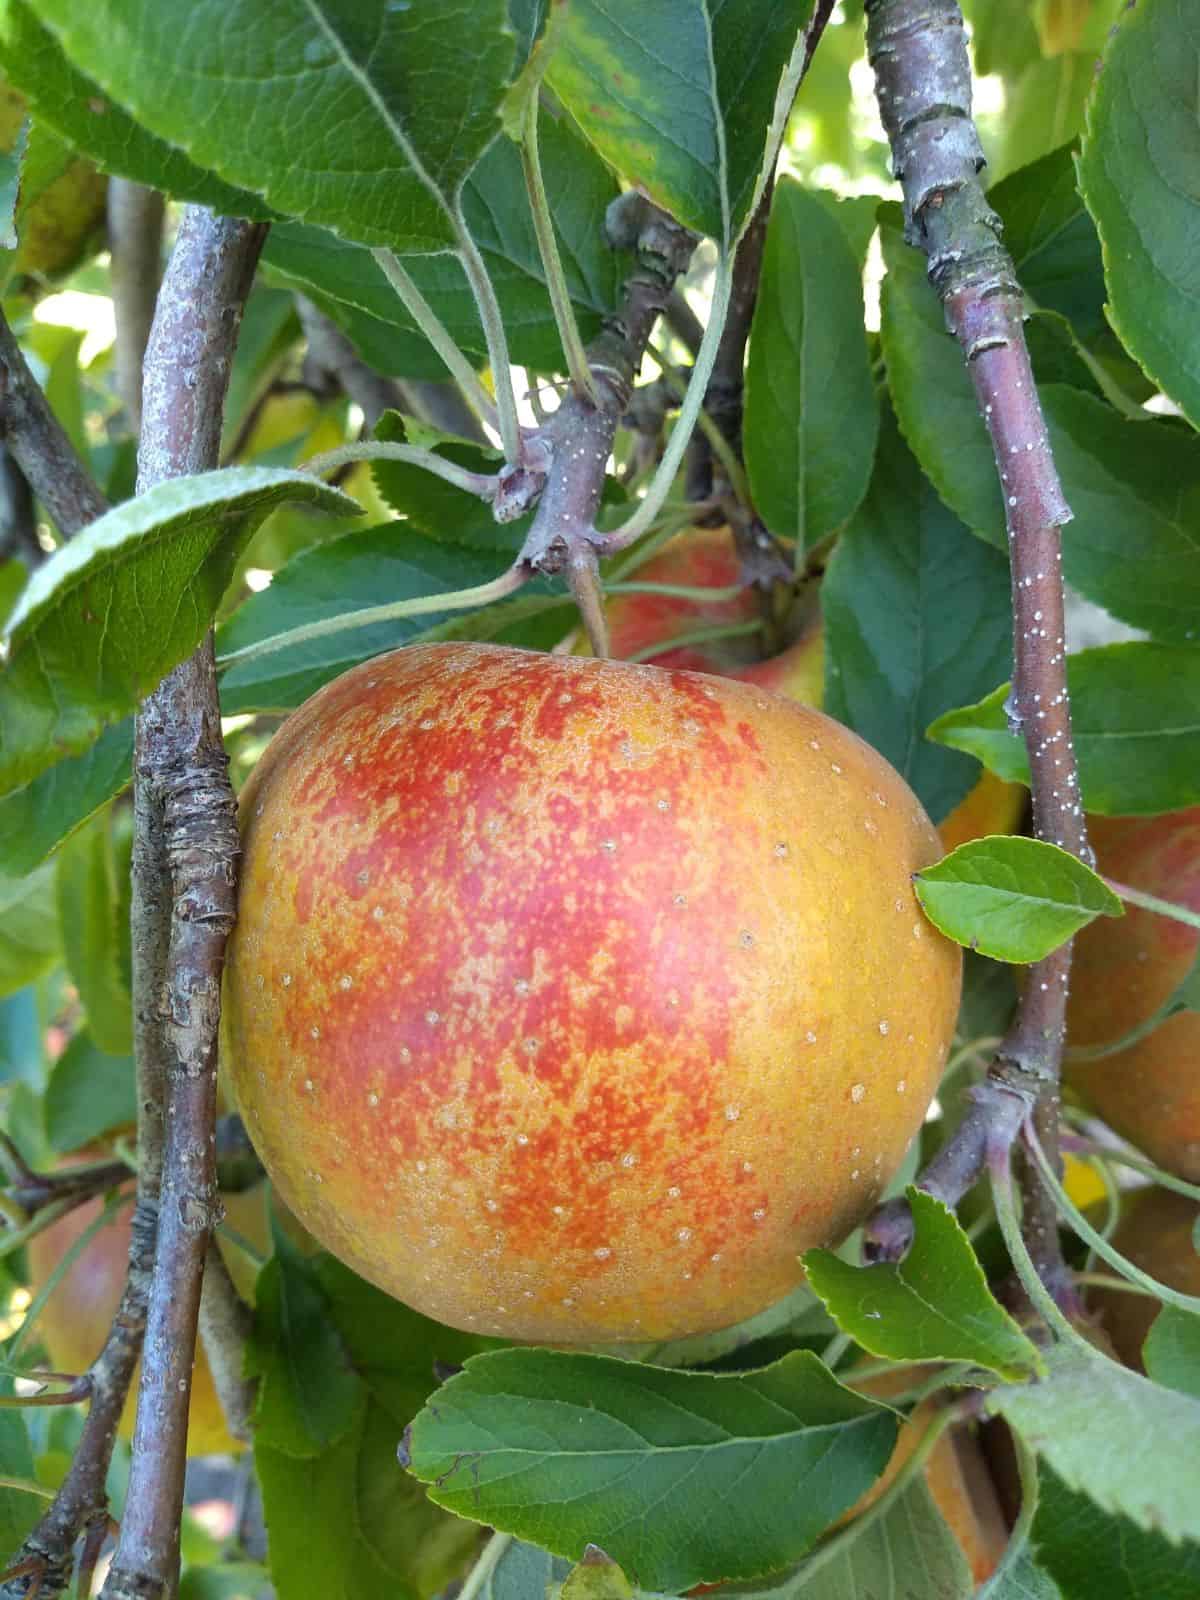 A close up picture of a single Melrose apple in a tree. The apple is red wit some brown russeting. 